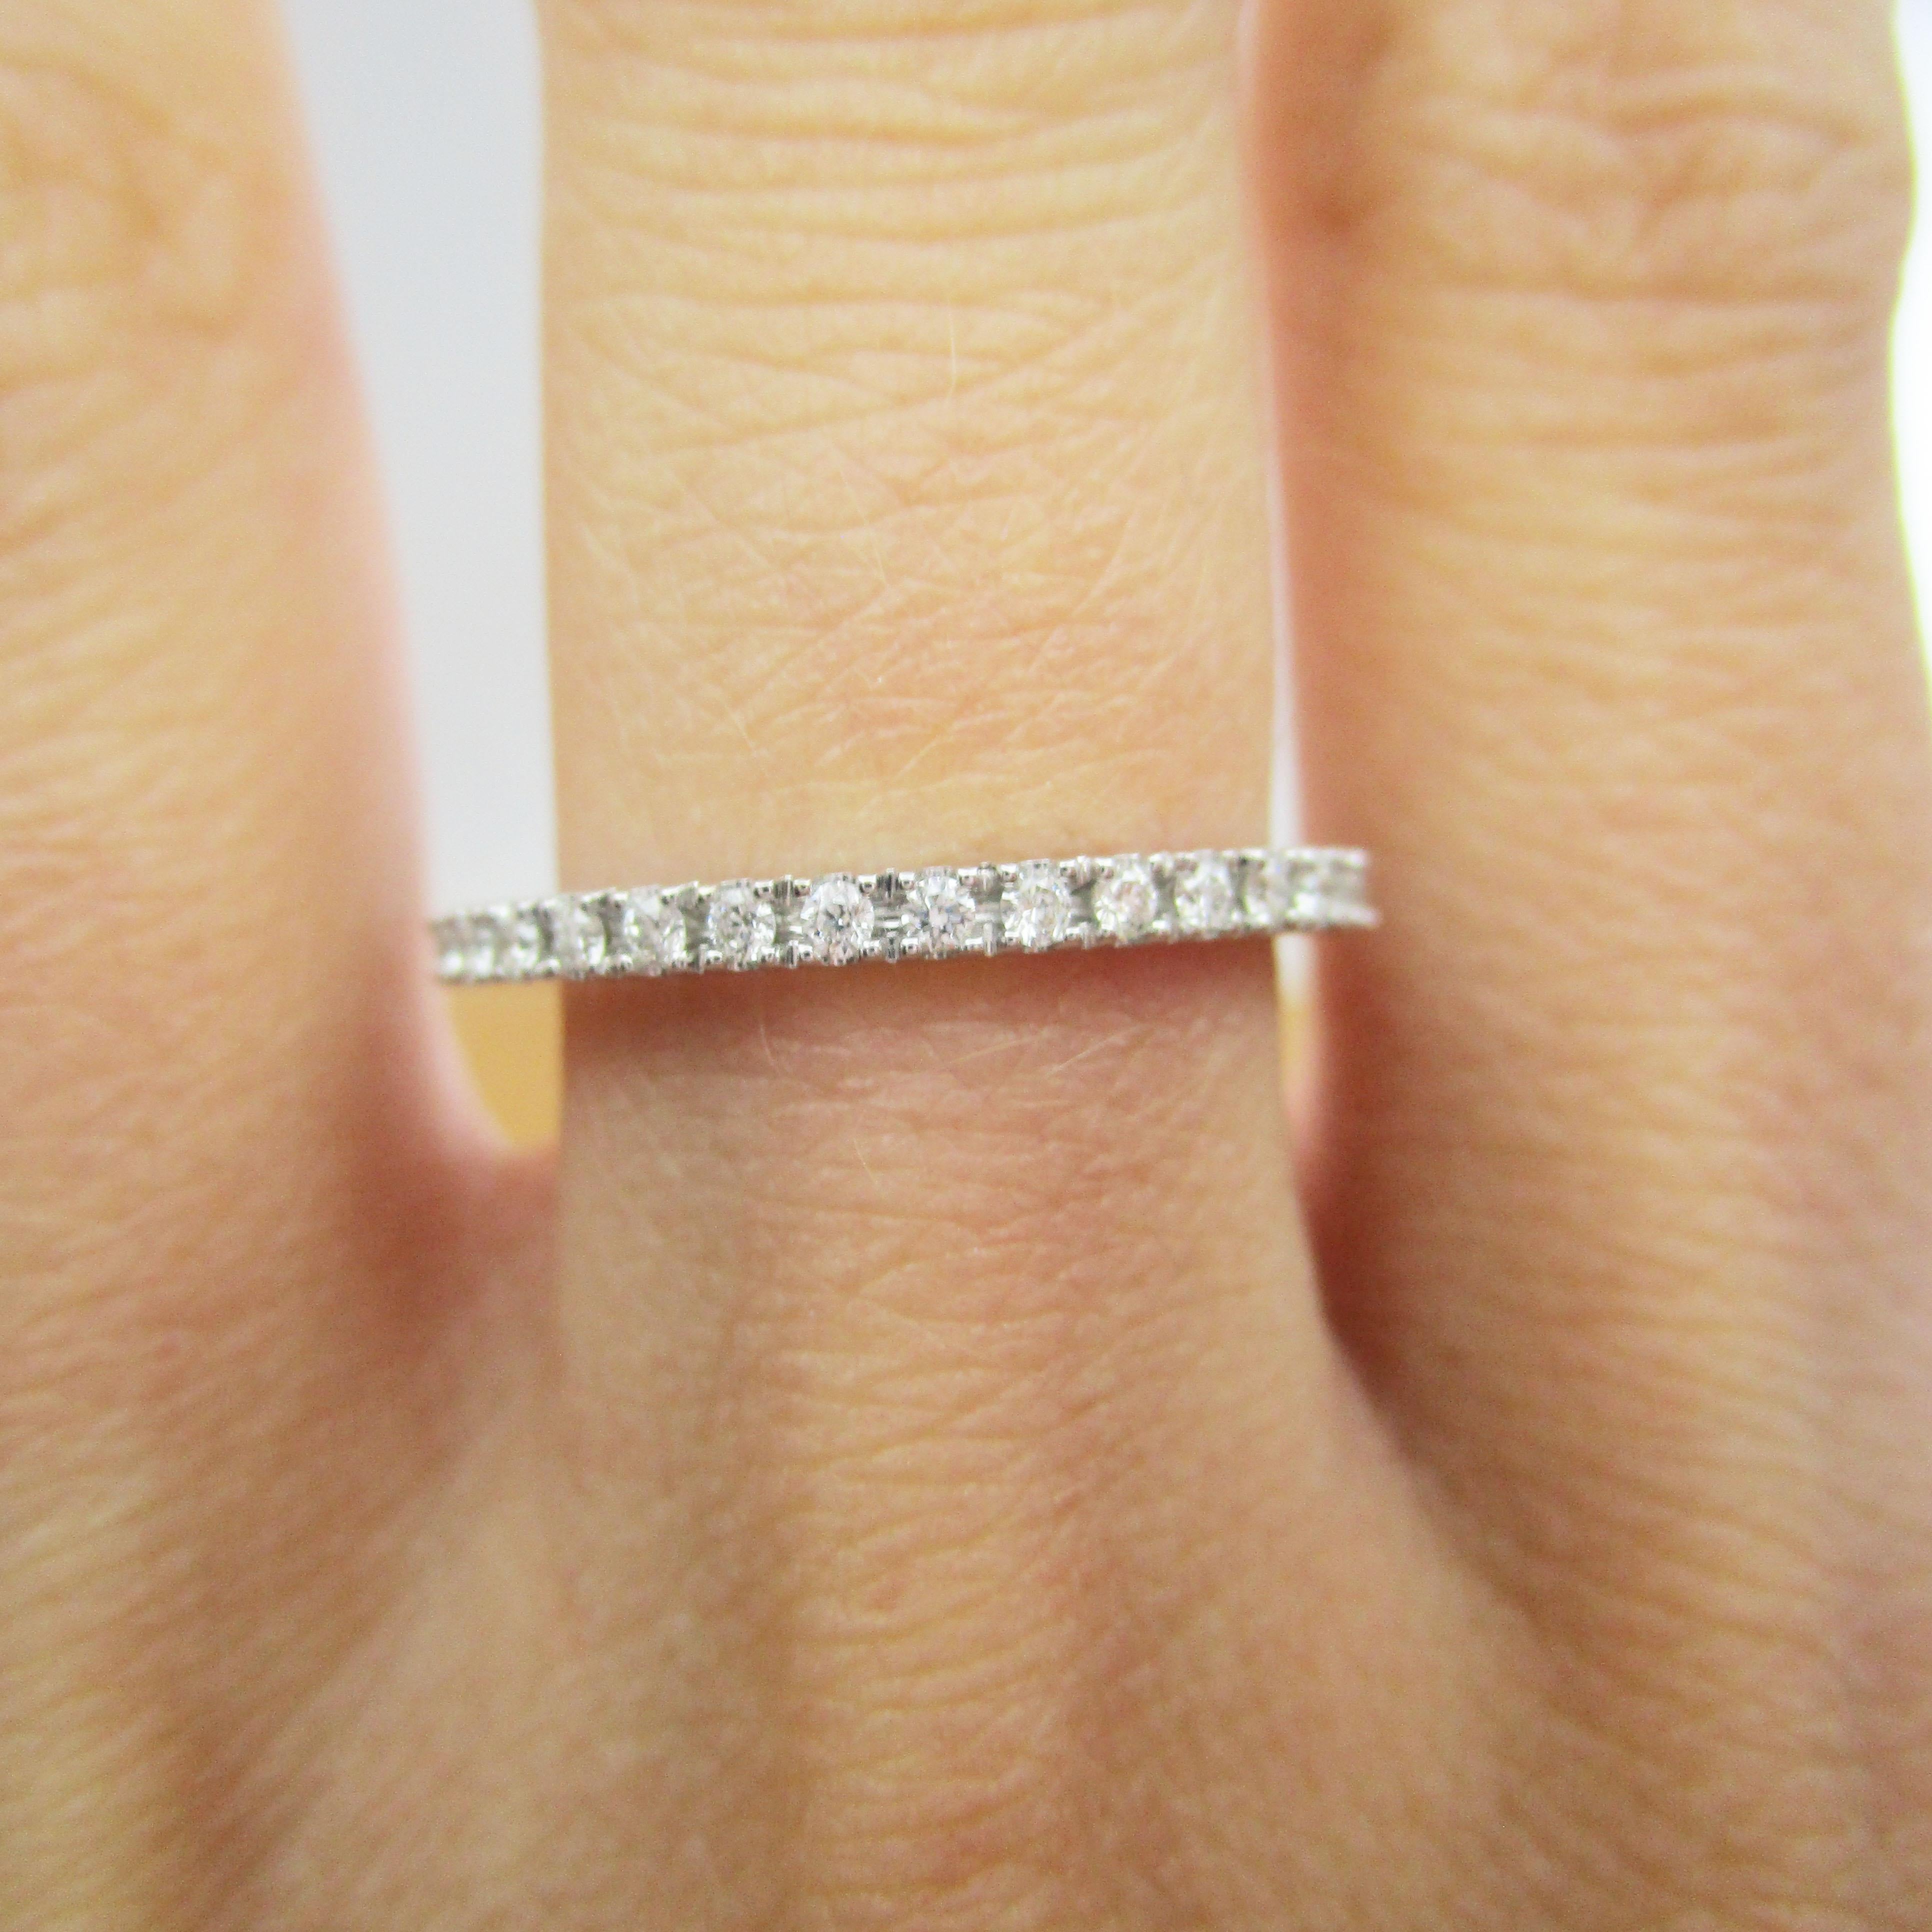 This gorgeous band by Elma Gil is in 18k white gold and has a beautiful array of brilliant white diamonds set into half of the band. The elegant simplicity of this band means that it is the ideal stacking band! This ring would also make a stunning